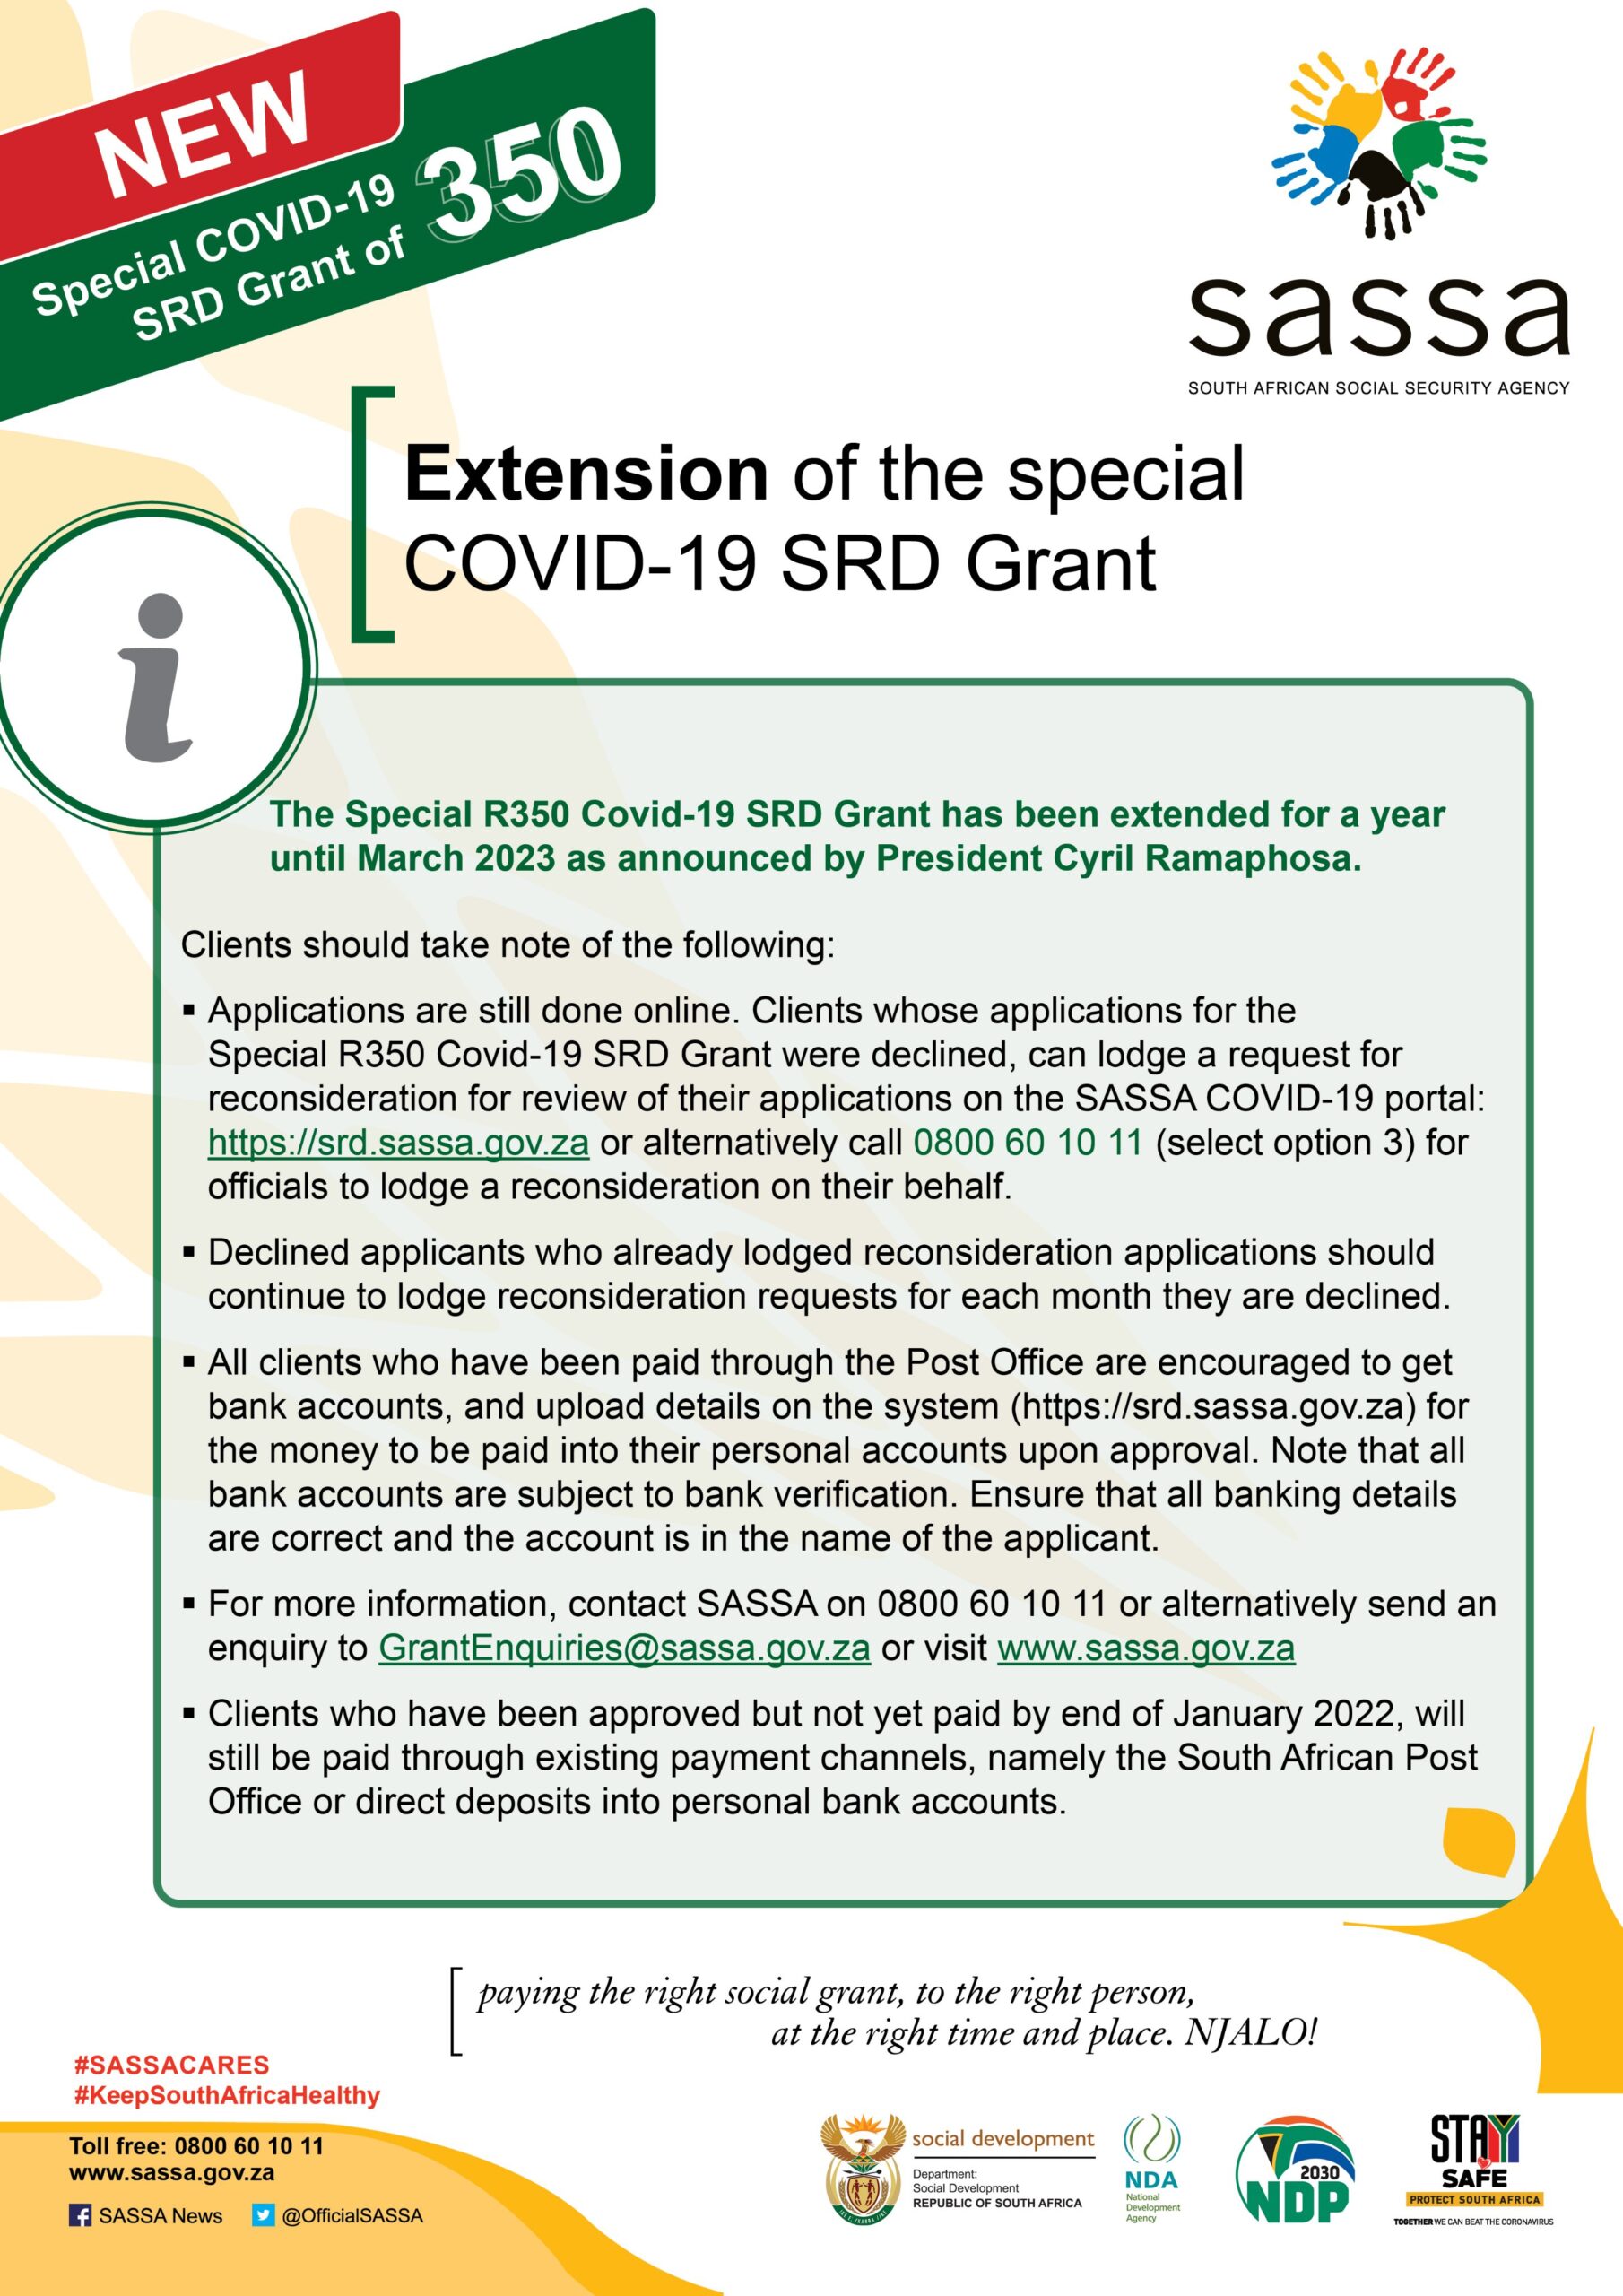 Extension of the special COVID-19 SRD Grant